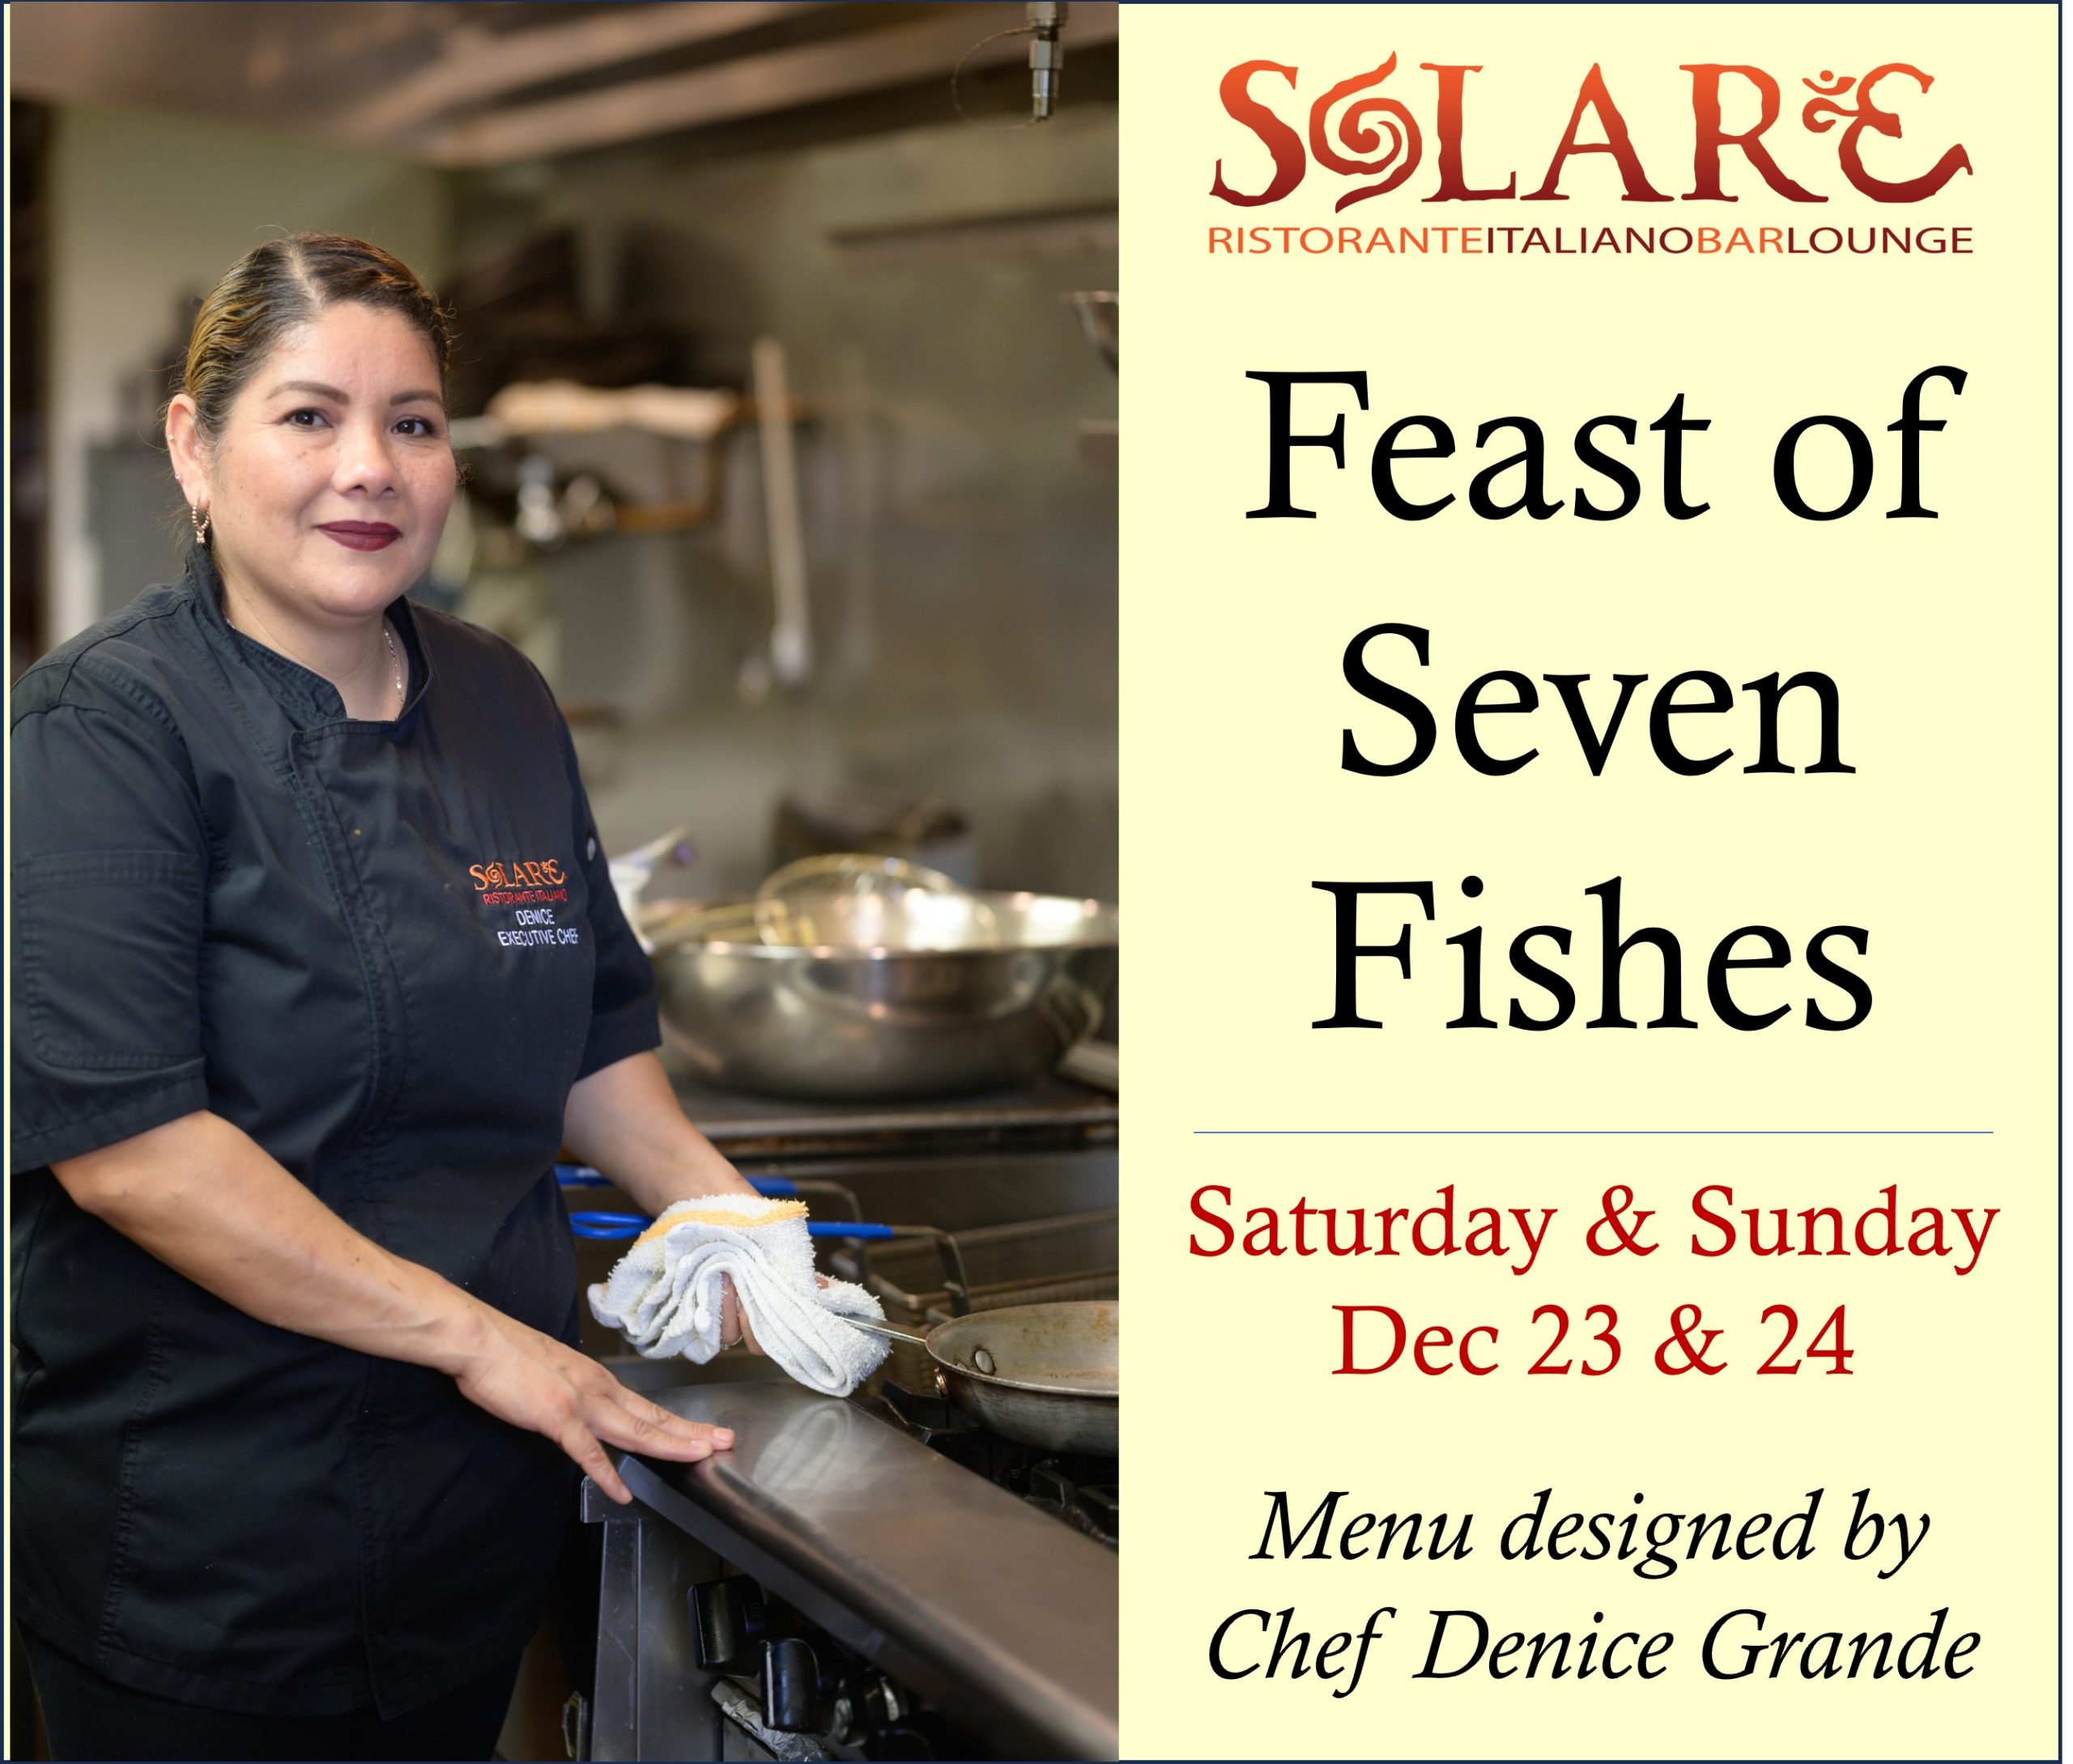 <a id="Solare-Feast-of-Seven-Fishes"></a>Solare "Feast of Seven Fishes"